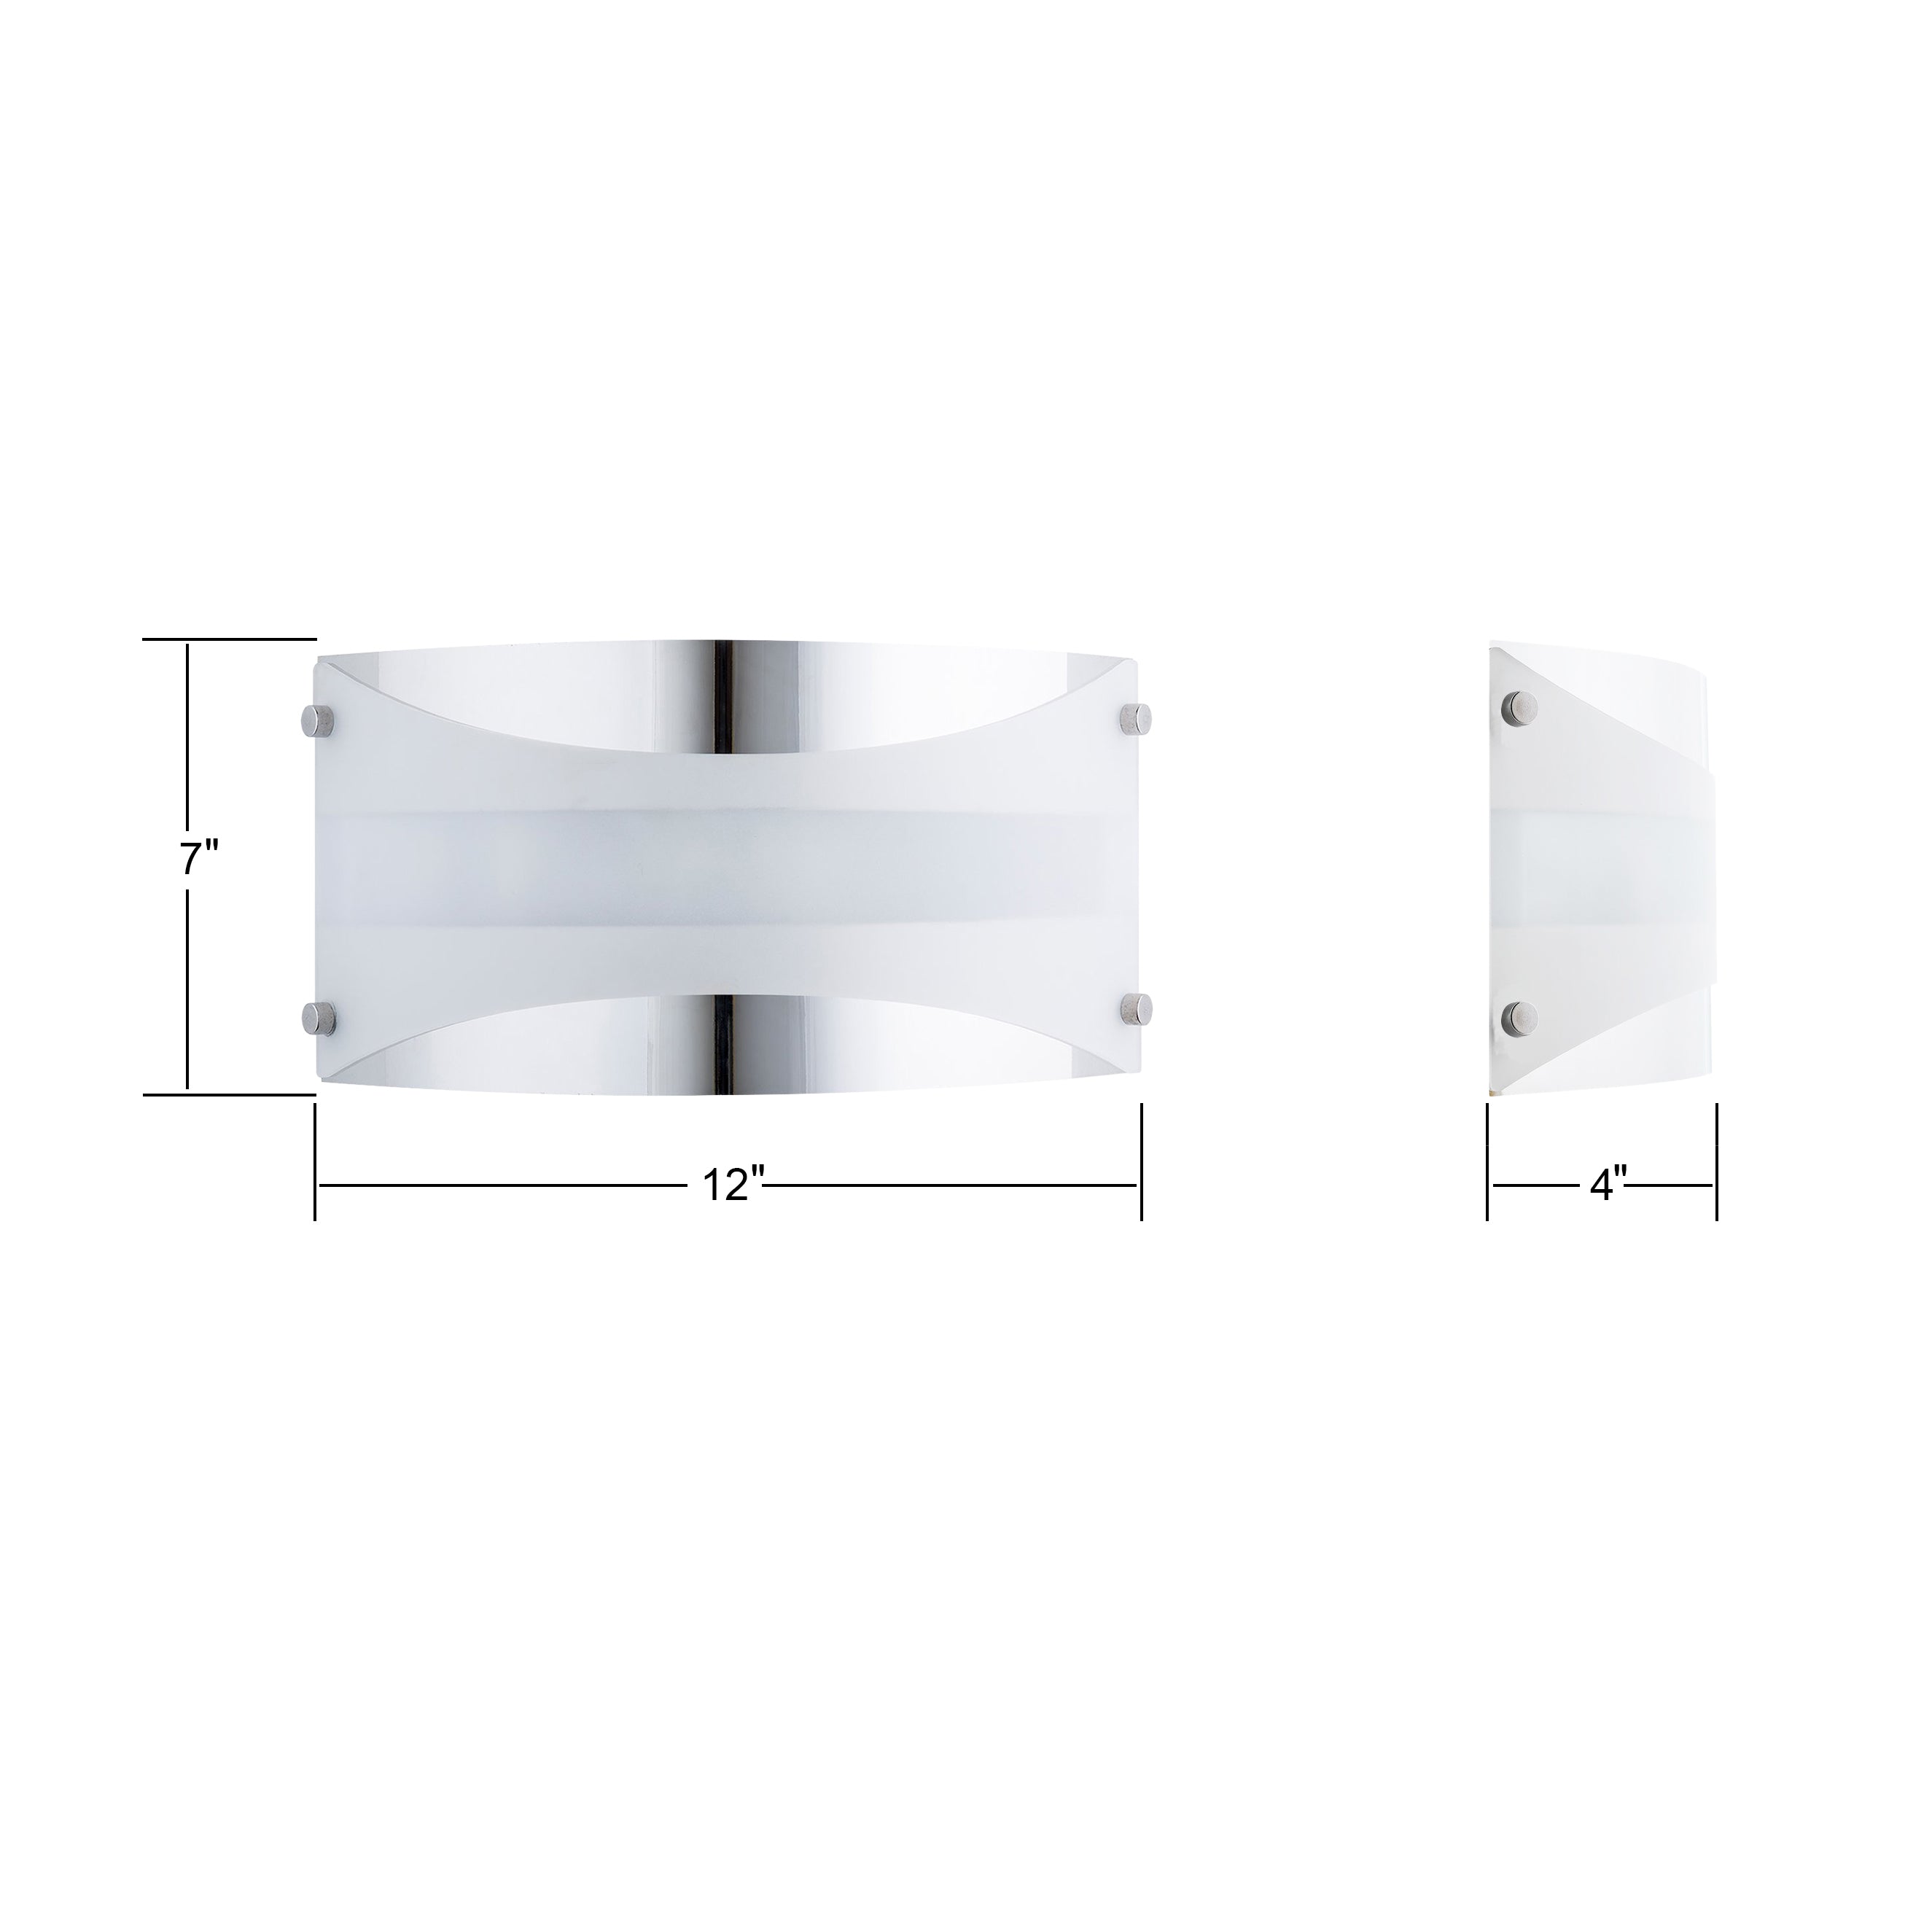 Acciaio Wall Sconce | Linea Lighting | Modern and Affordable